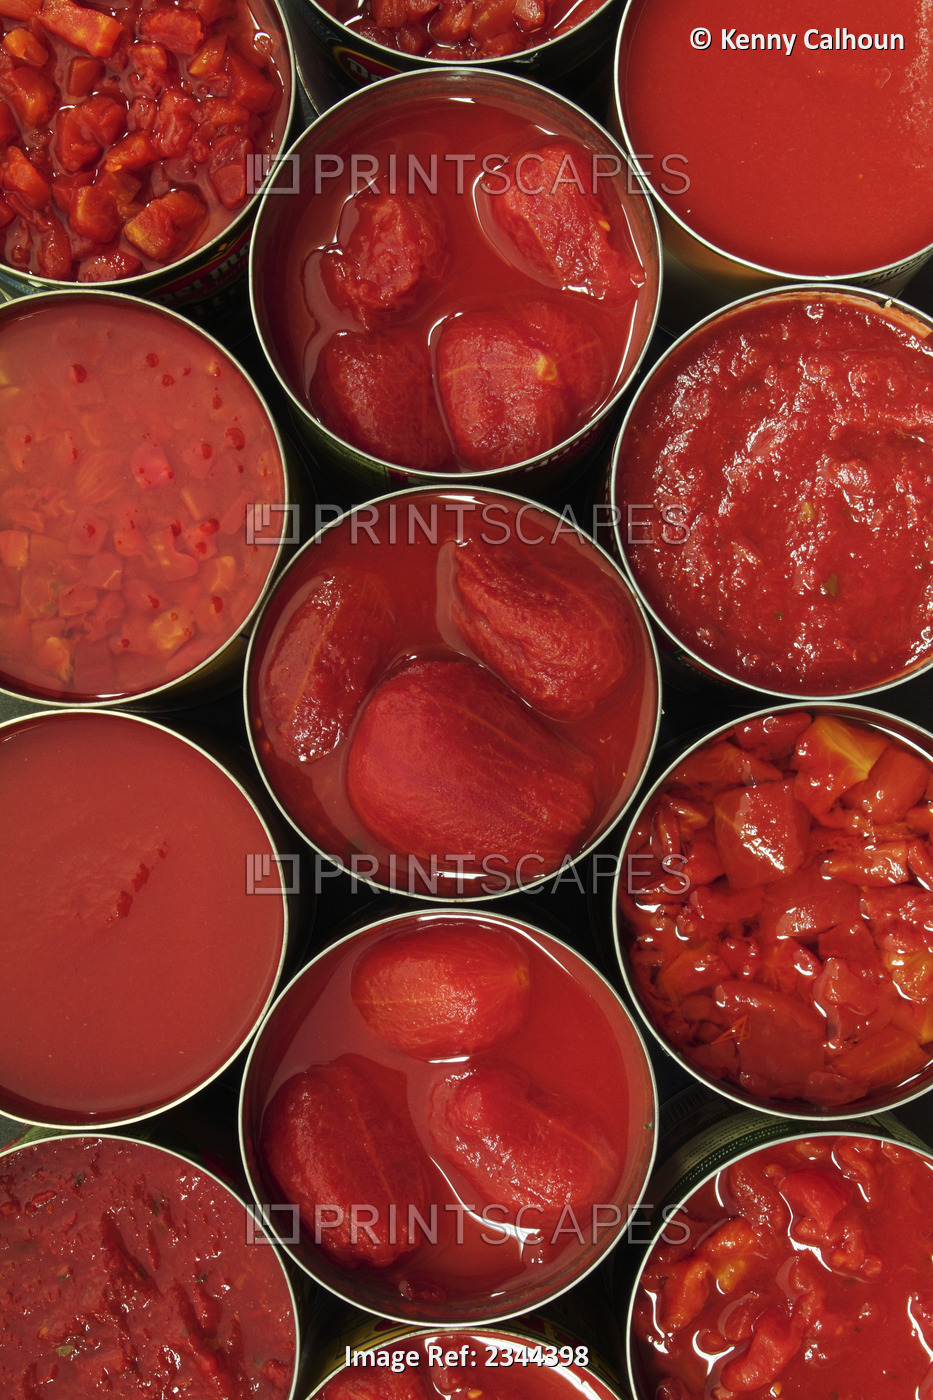 Agriculture - Whole peel, diced and sauce processing tomatoes in cans at a ...